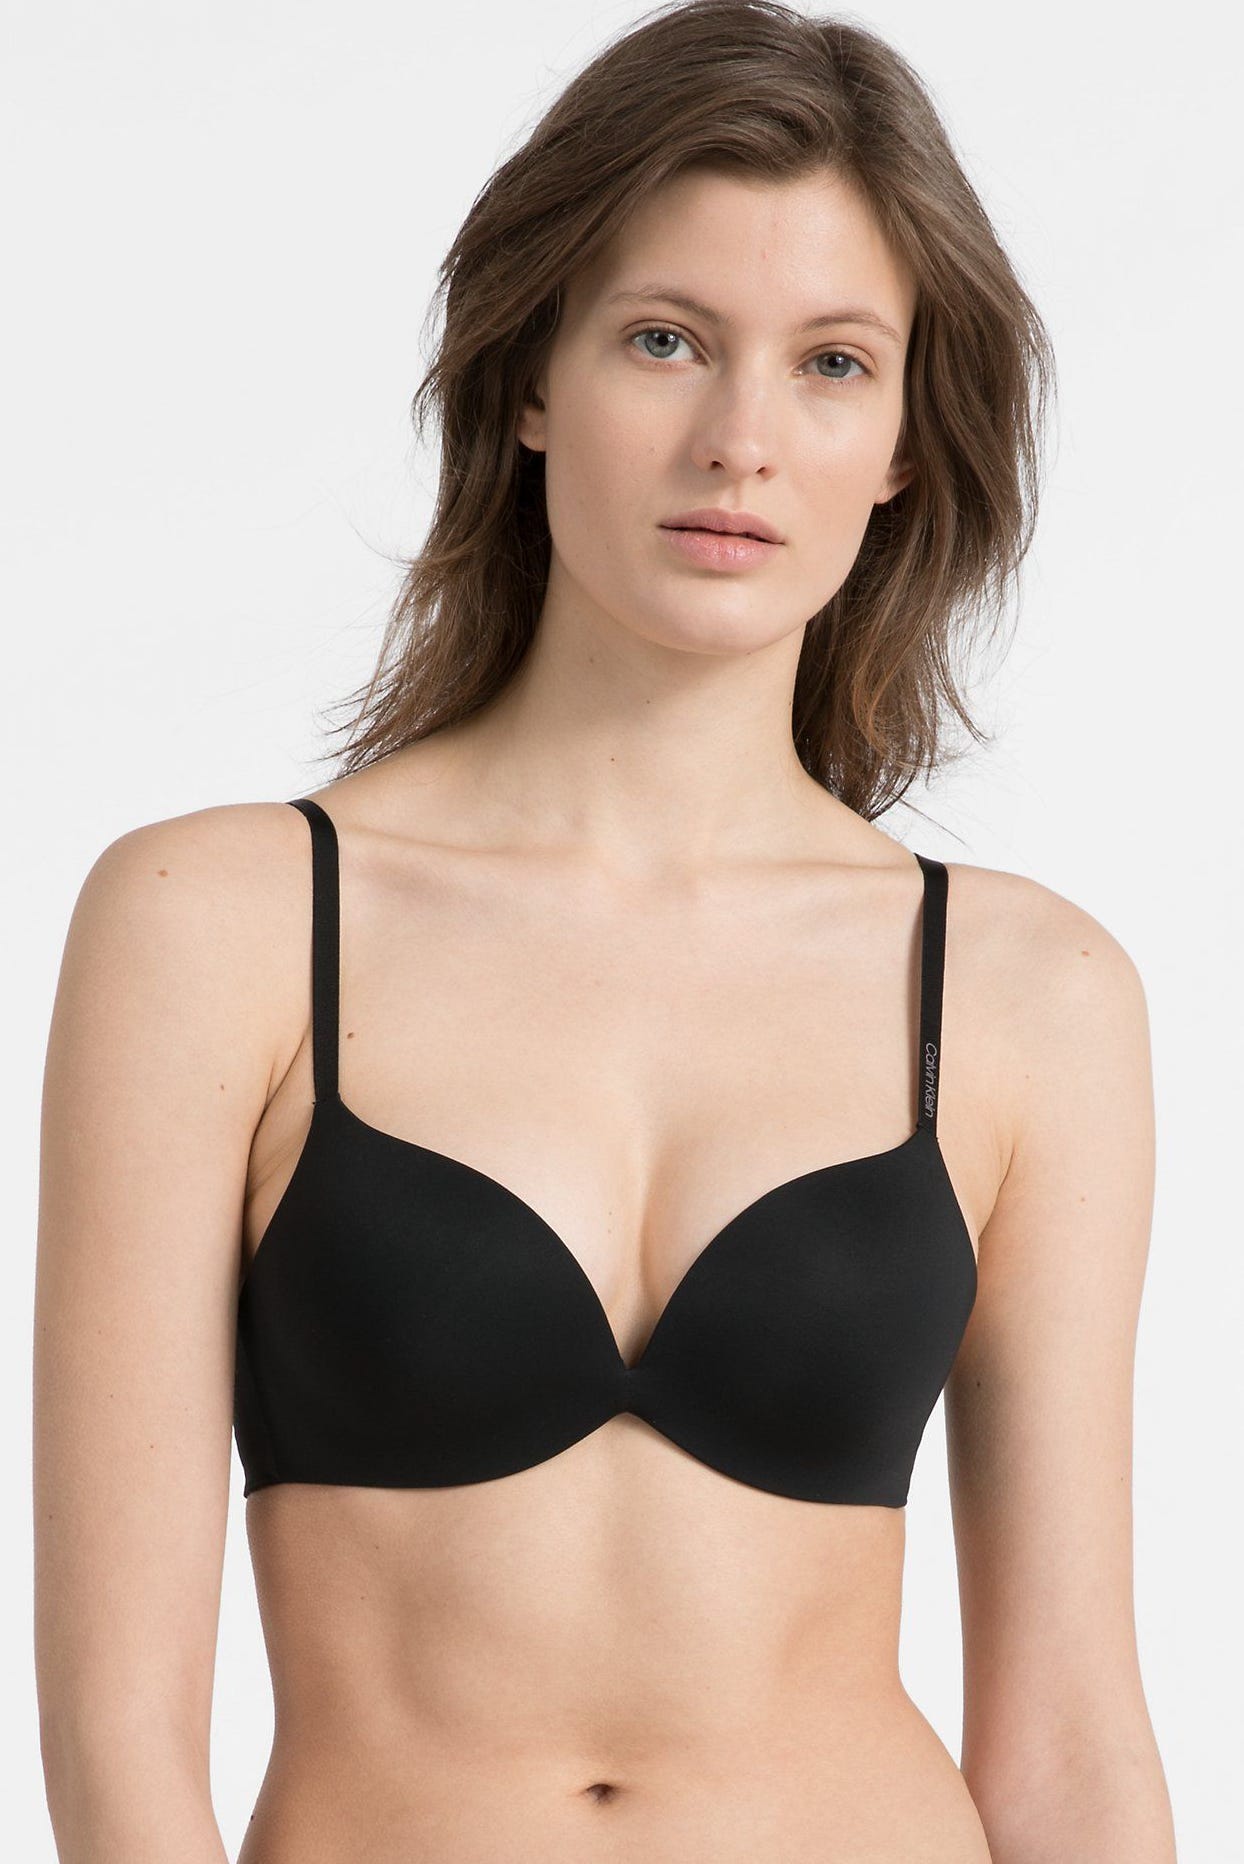 beth jacques recommends Teens In Push Up Bras